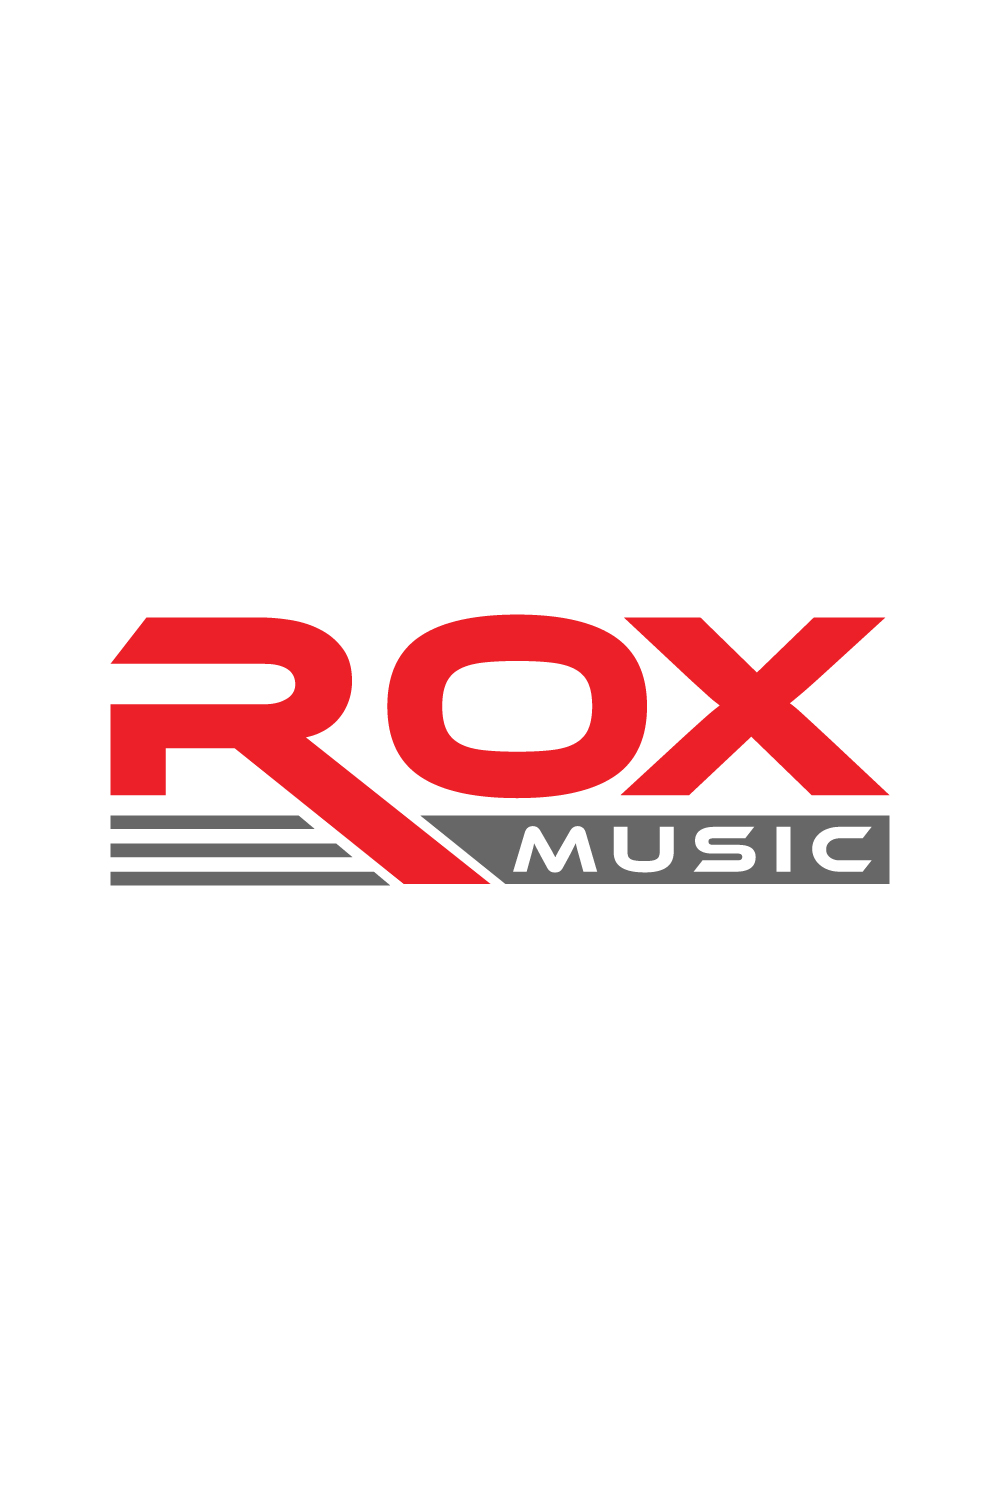 Rox Music pinterest preview image.